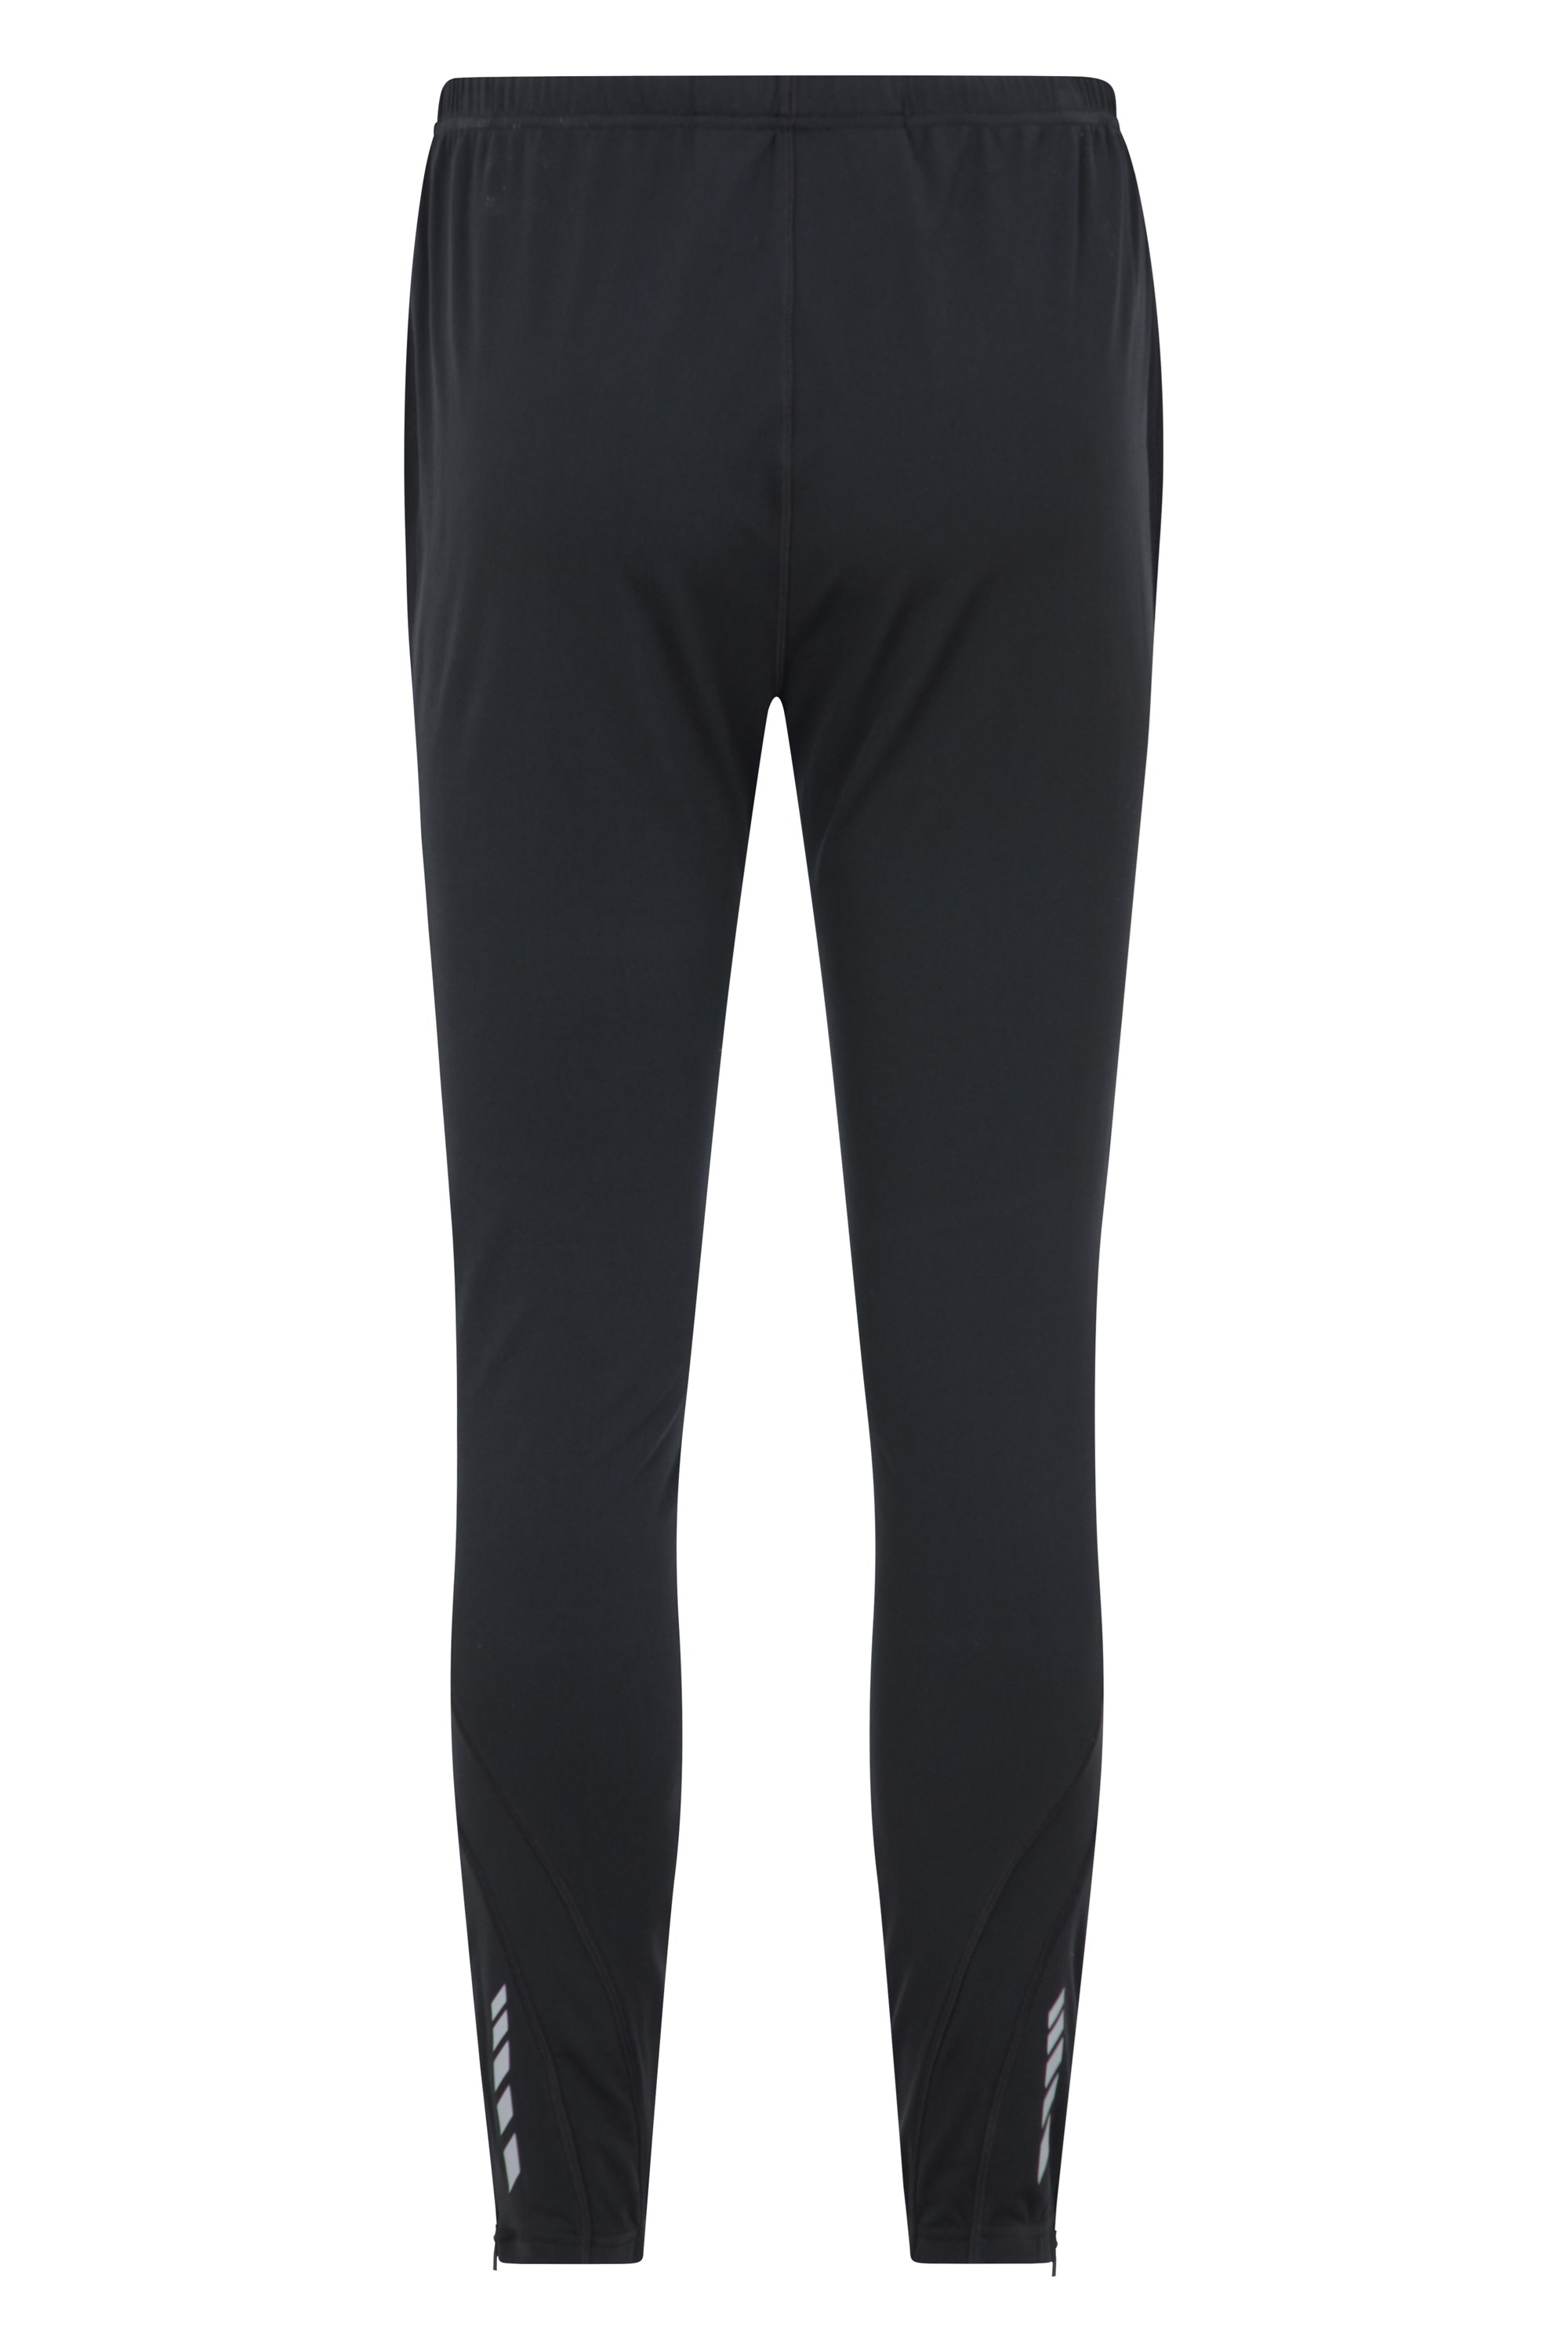 6 Pack: Seamless Fleece Lined Leggings,Black, One Size at